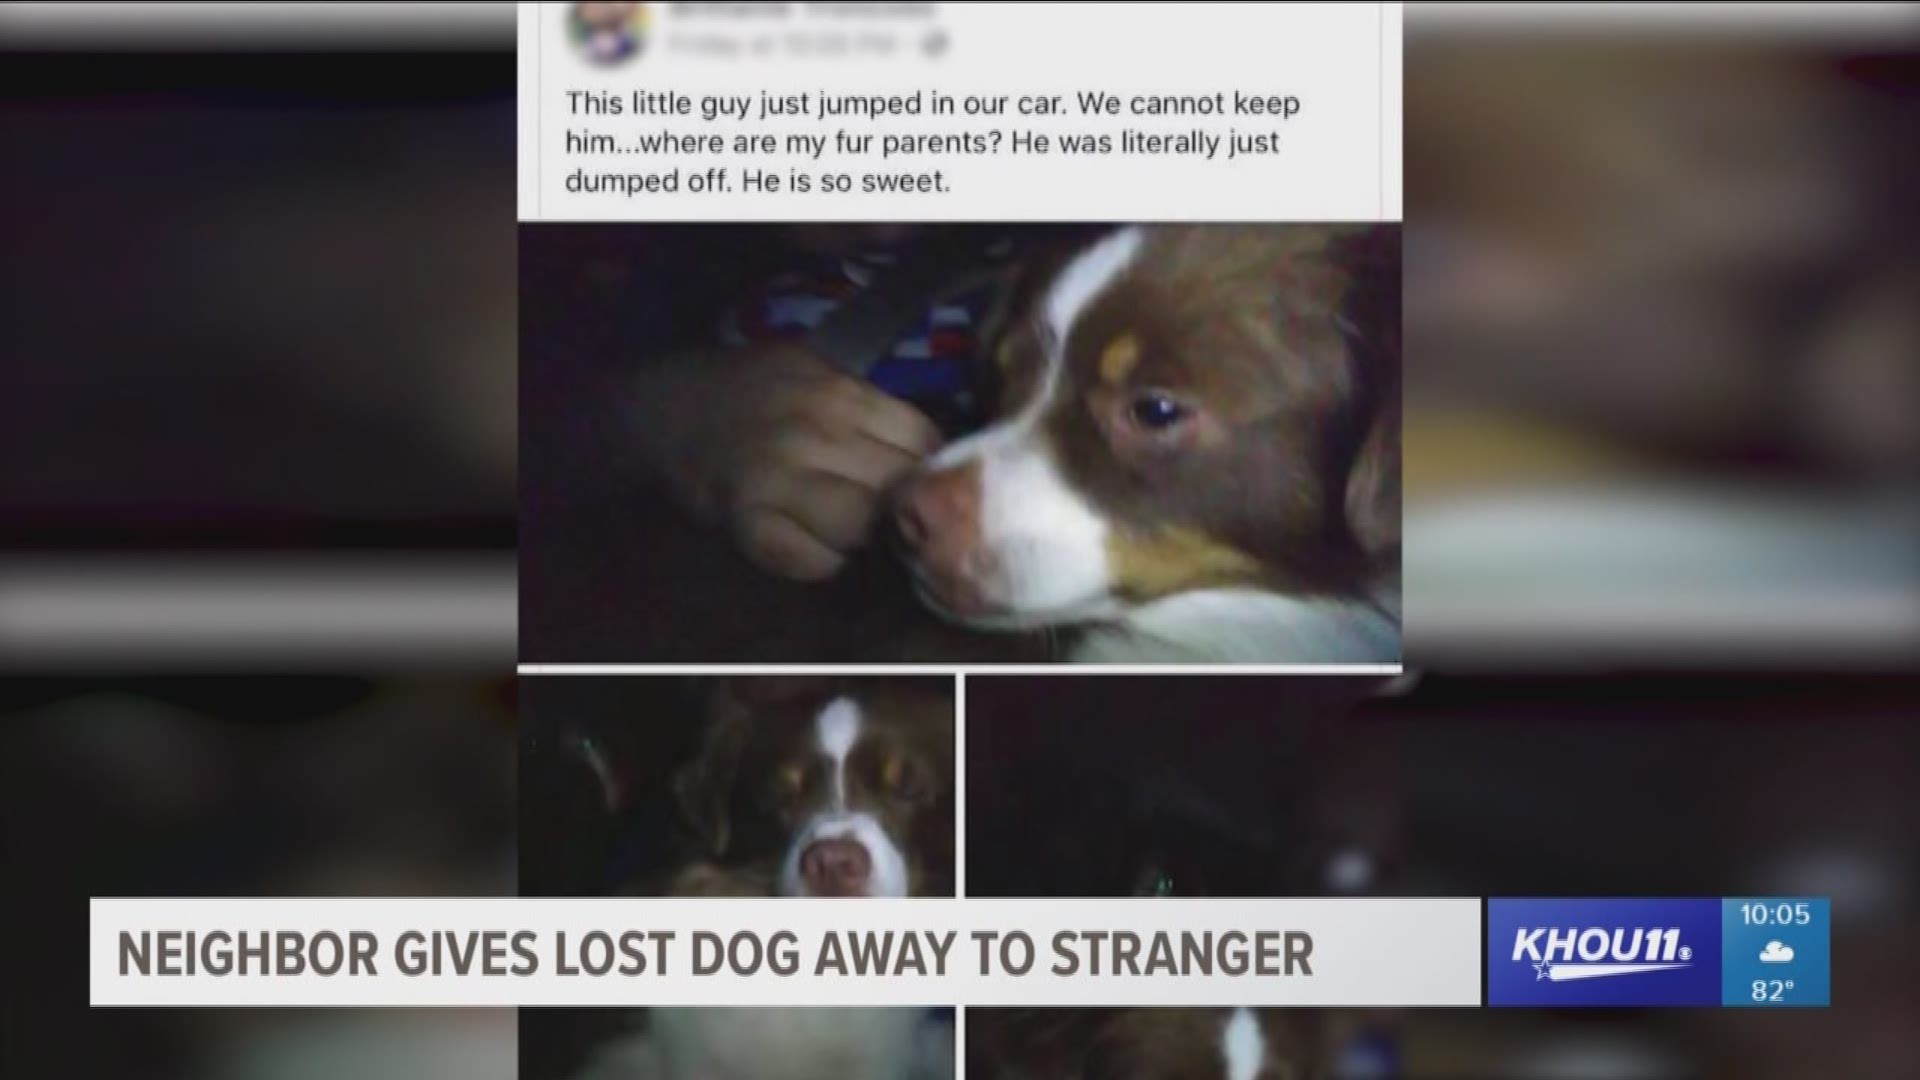 An Alvin family has been searching for their two dogs since last week after the pups were scared off by fireworks. Come to find out, someone did find one of them but gave her away to a stranger.